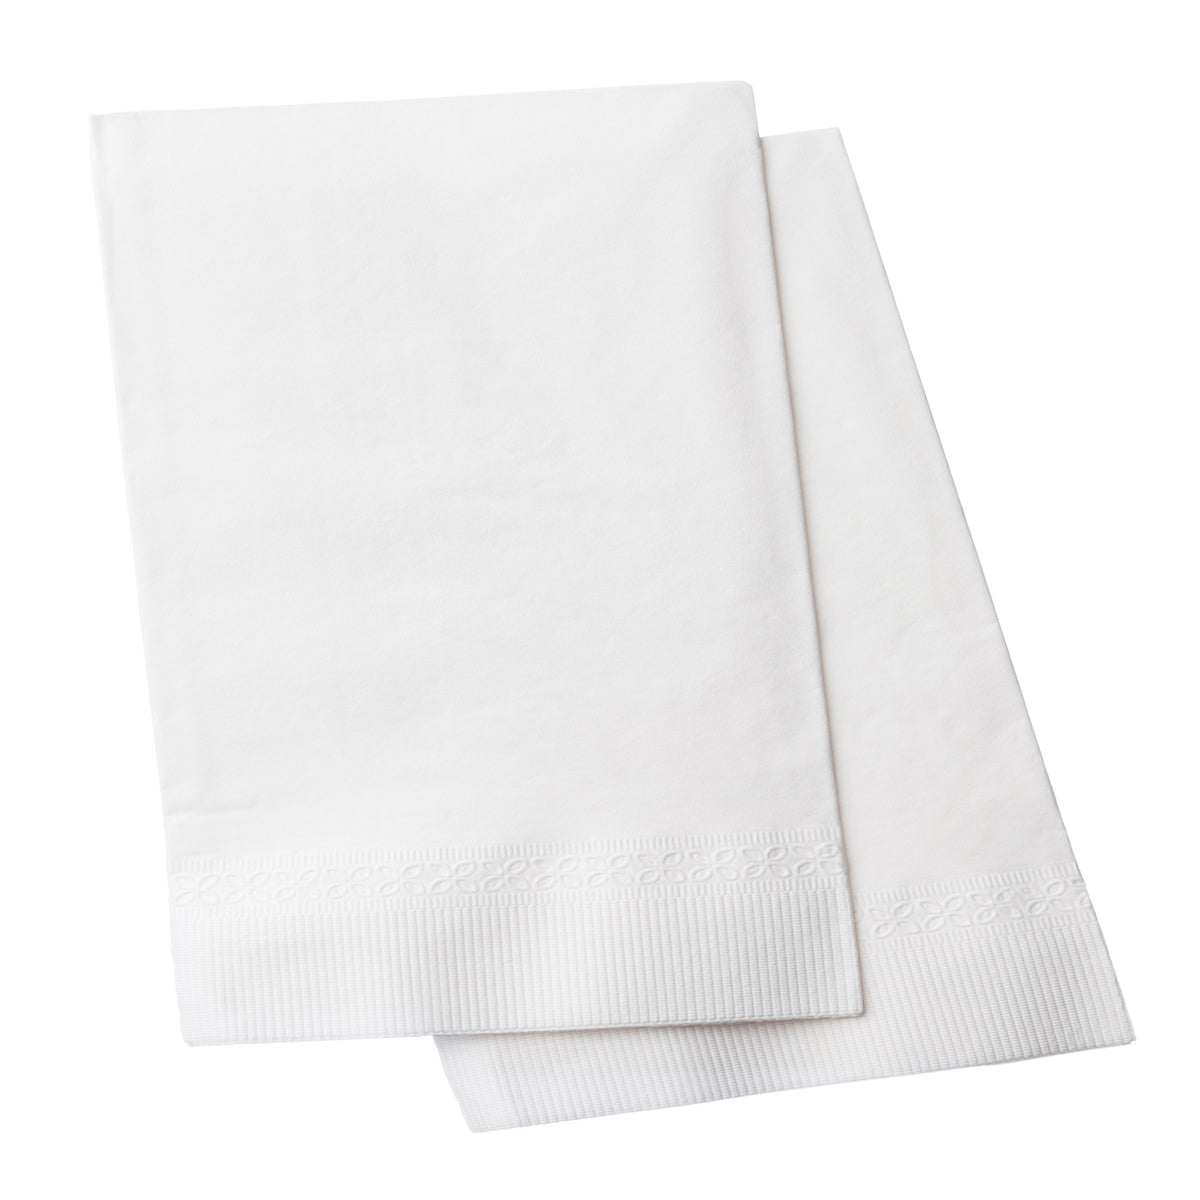 Karat 12x13 Off-Fold Napkins - Kraft - 6,000 ct, Coffee Shop Supplies, Carry Out Containers